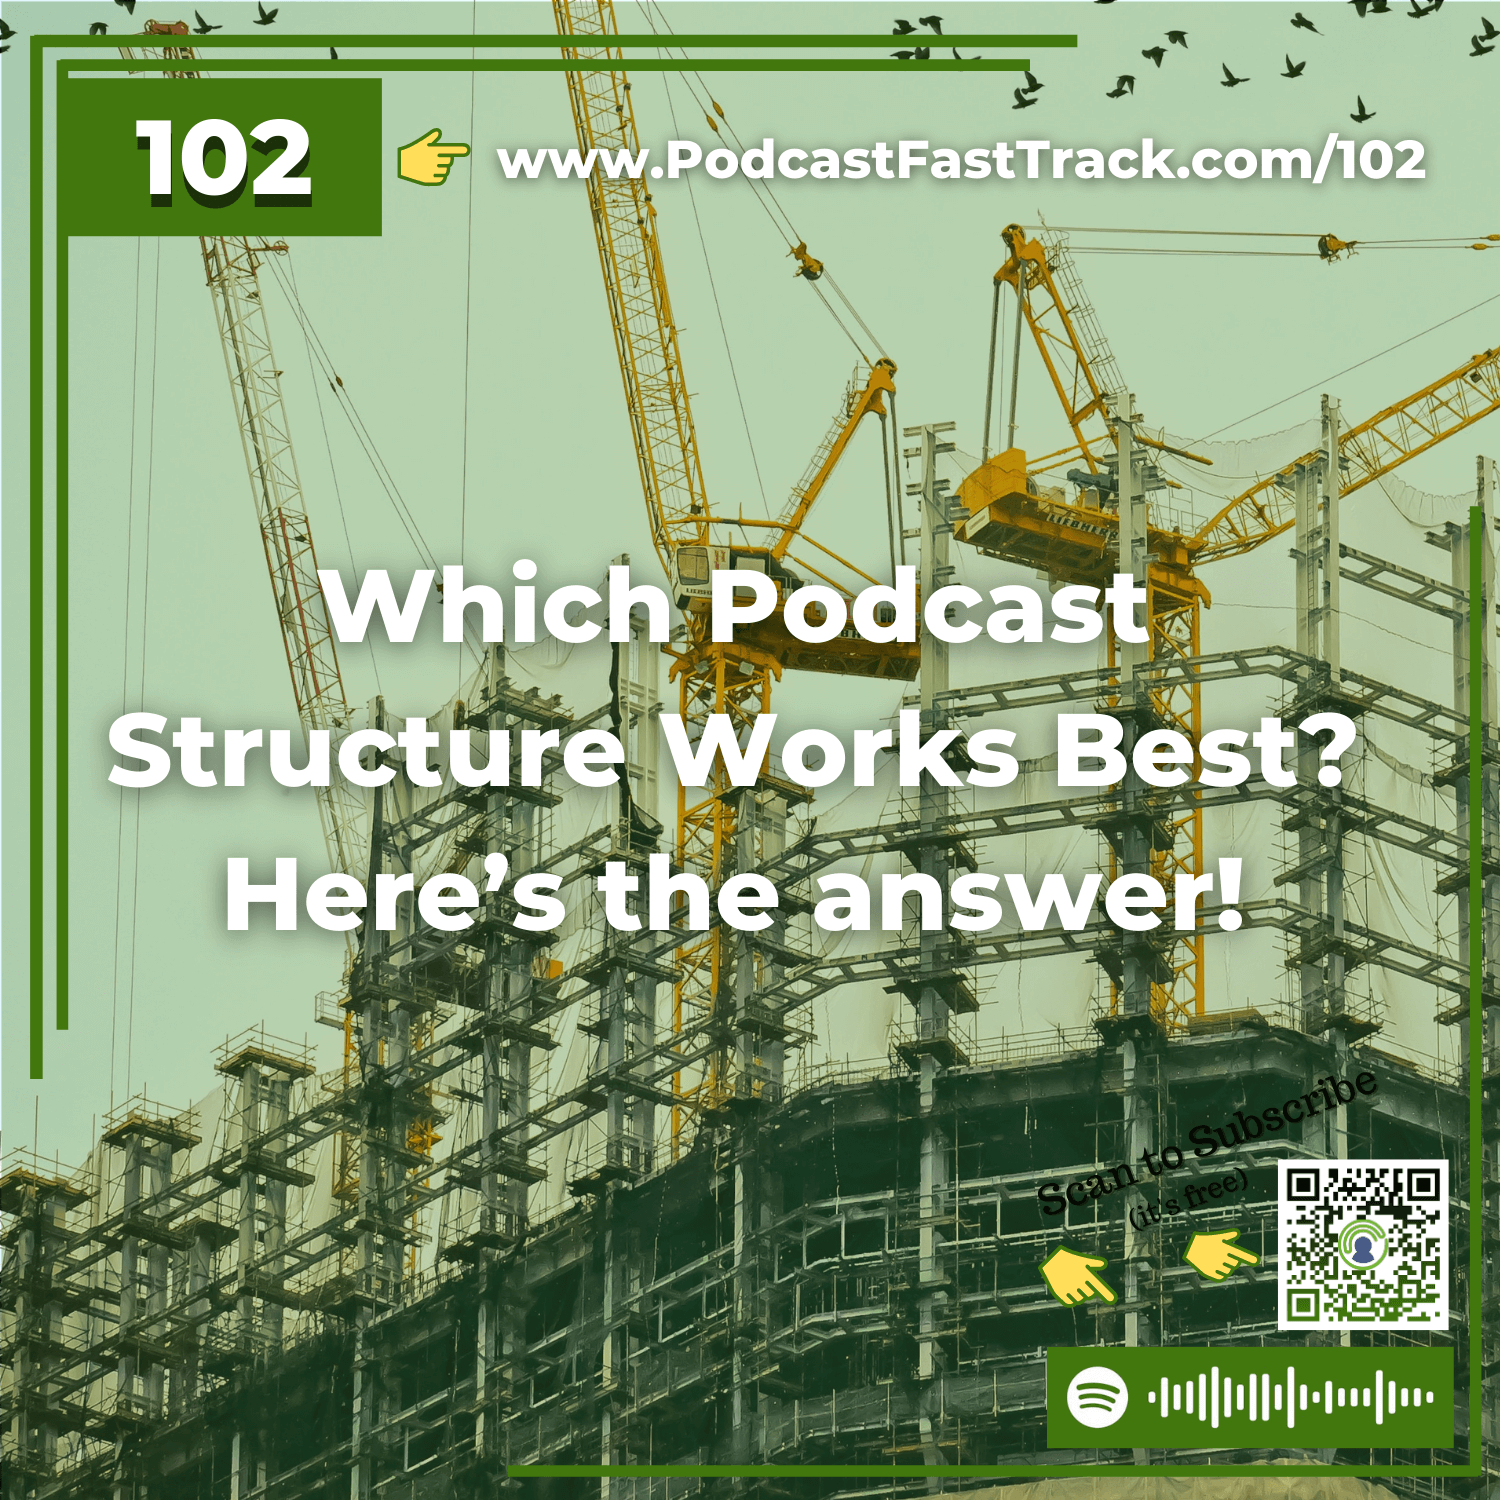 102: Which Podcast Structure Works Best? Here’s the answer!